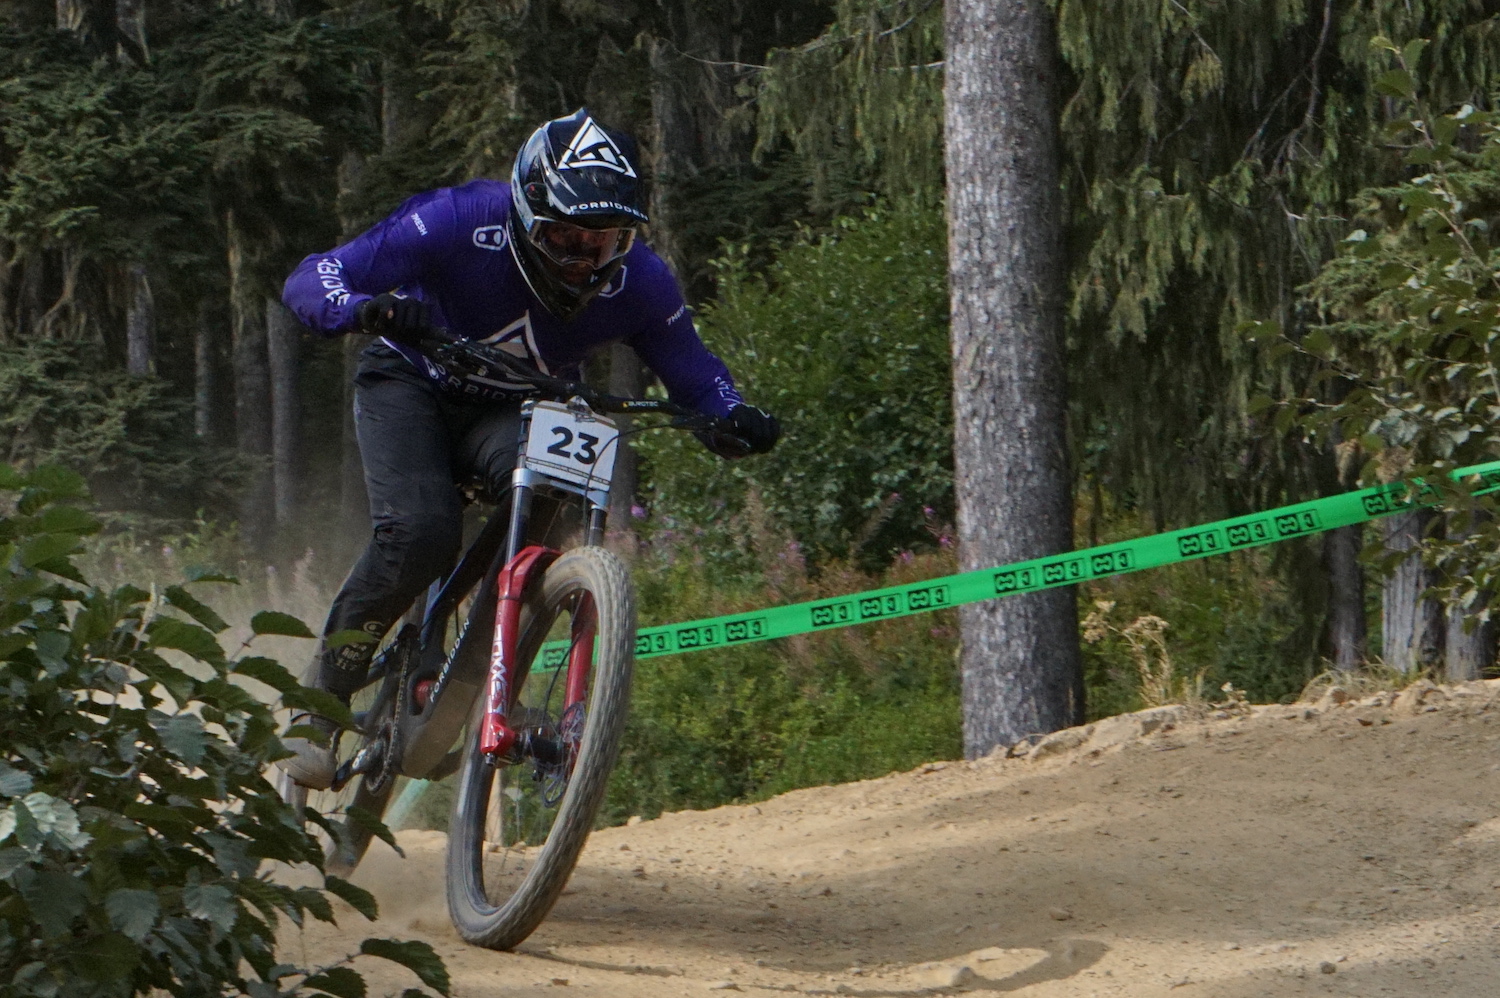 Steve Smith Memorial DH brings racing (and community) back to